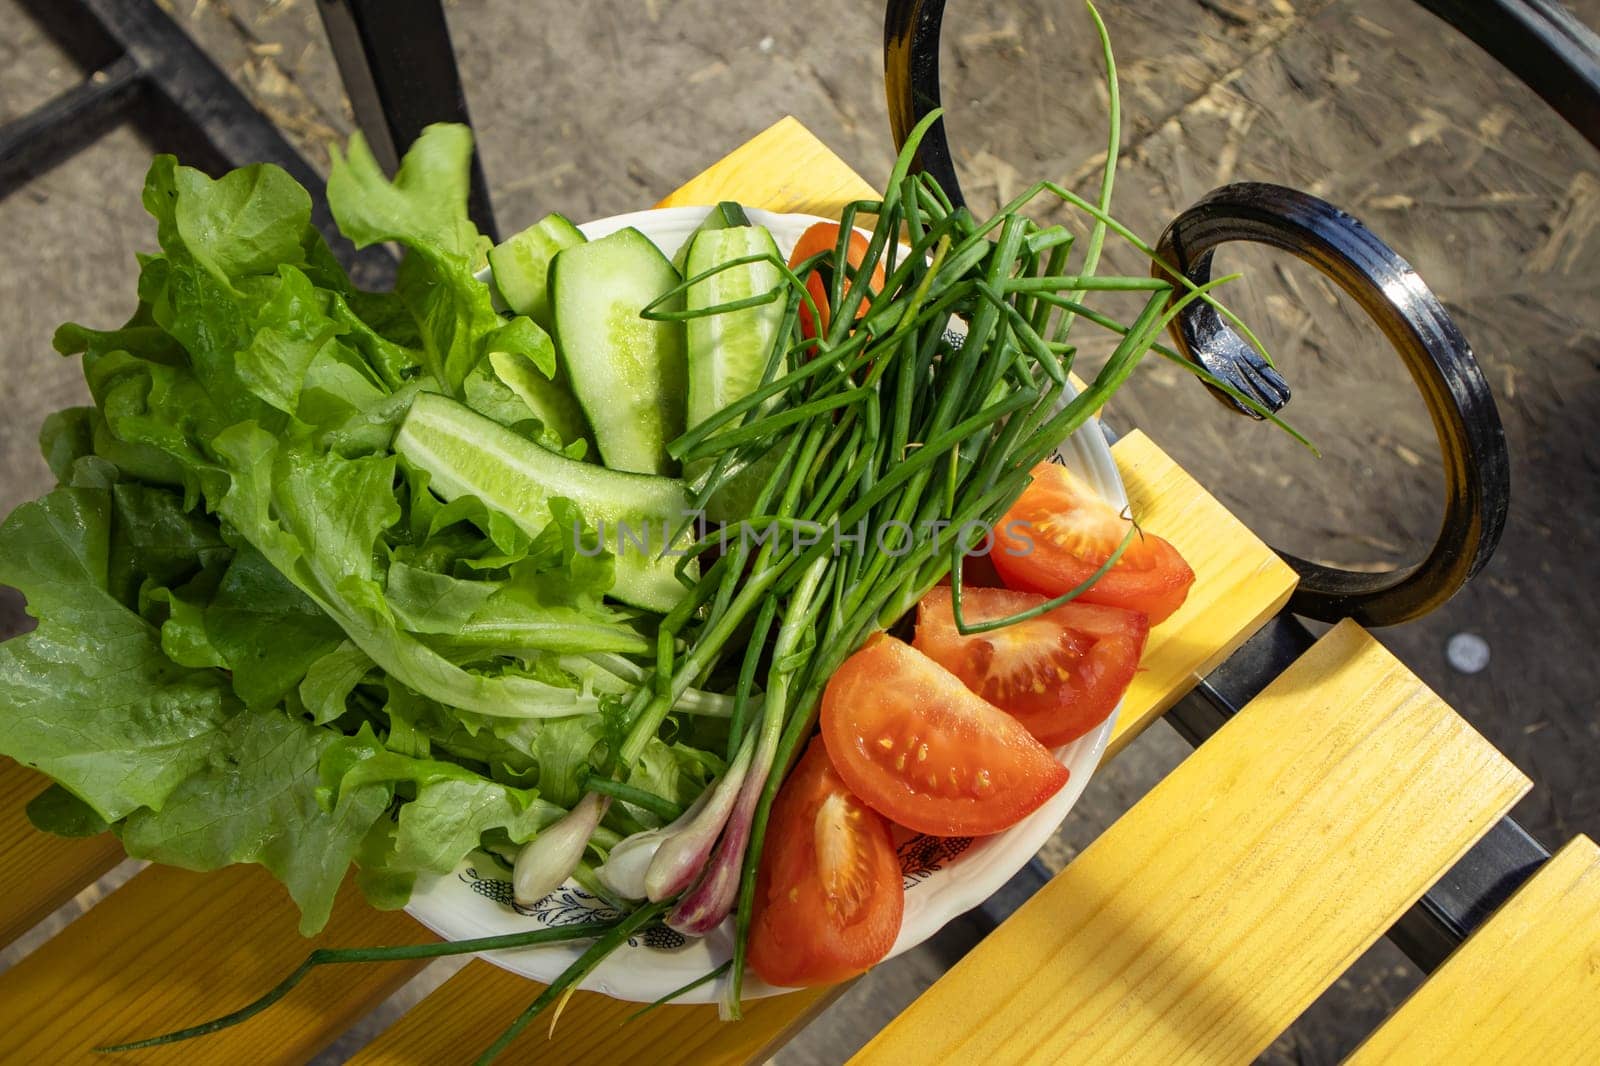 Fresh vegetables - lettuce, spring onions, tomatoes and cucumbers on a white plate on a wooden vintage bench in the garden background. The concept of growing organic vegetables.